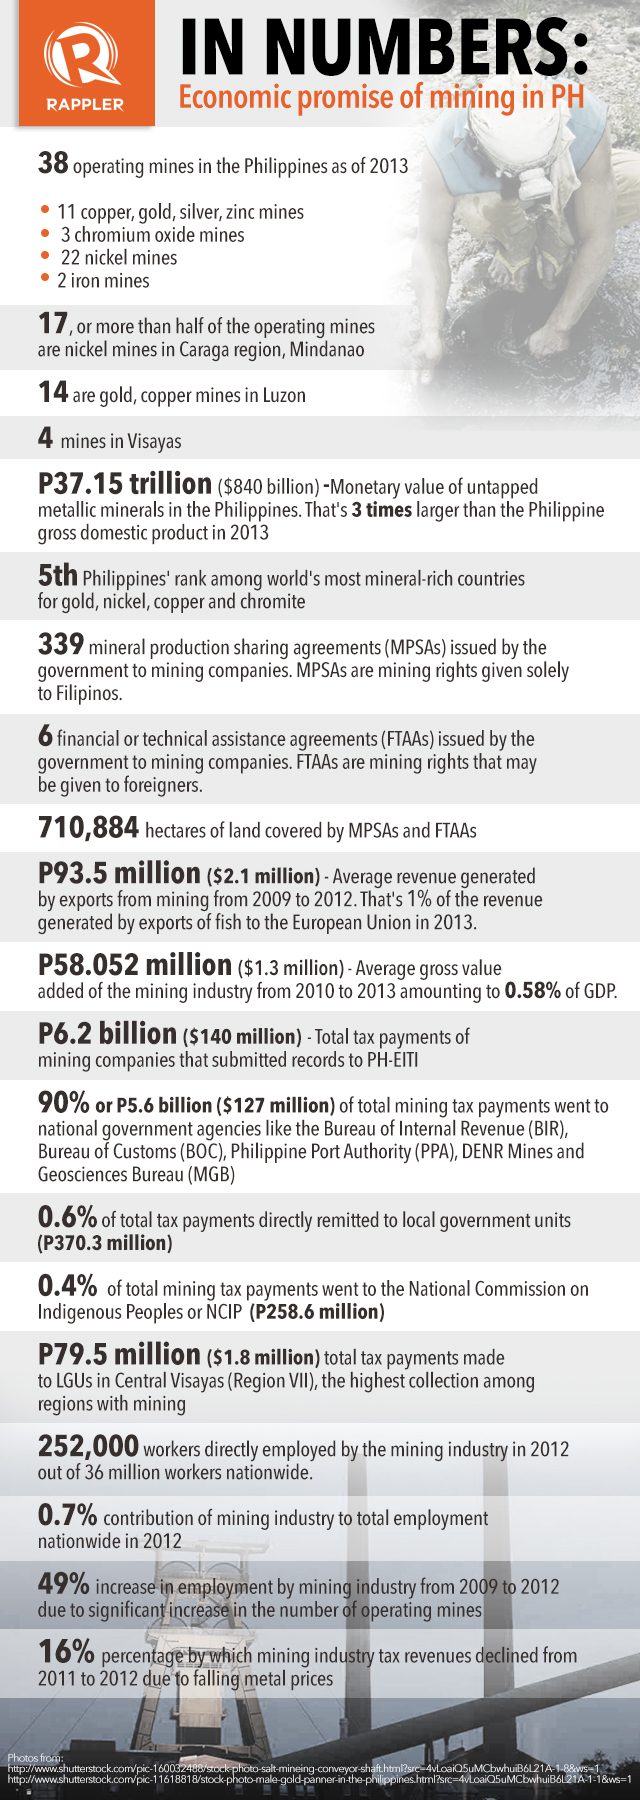 IN NUMBERS: Economic promise of mining in PH